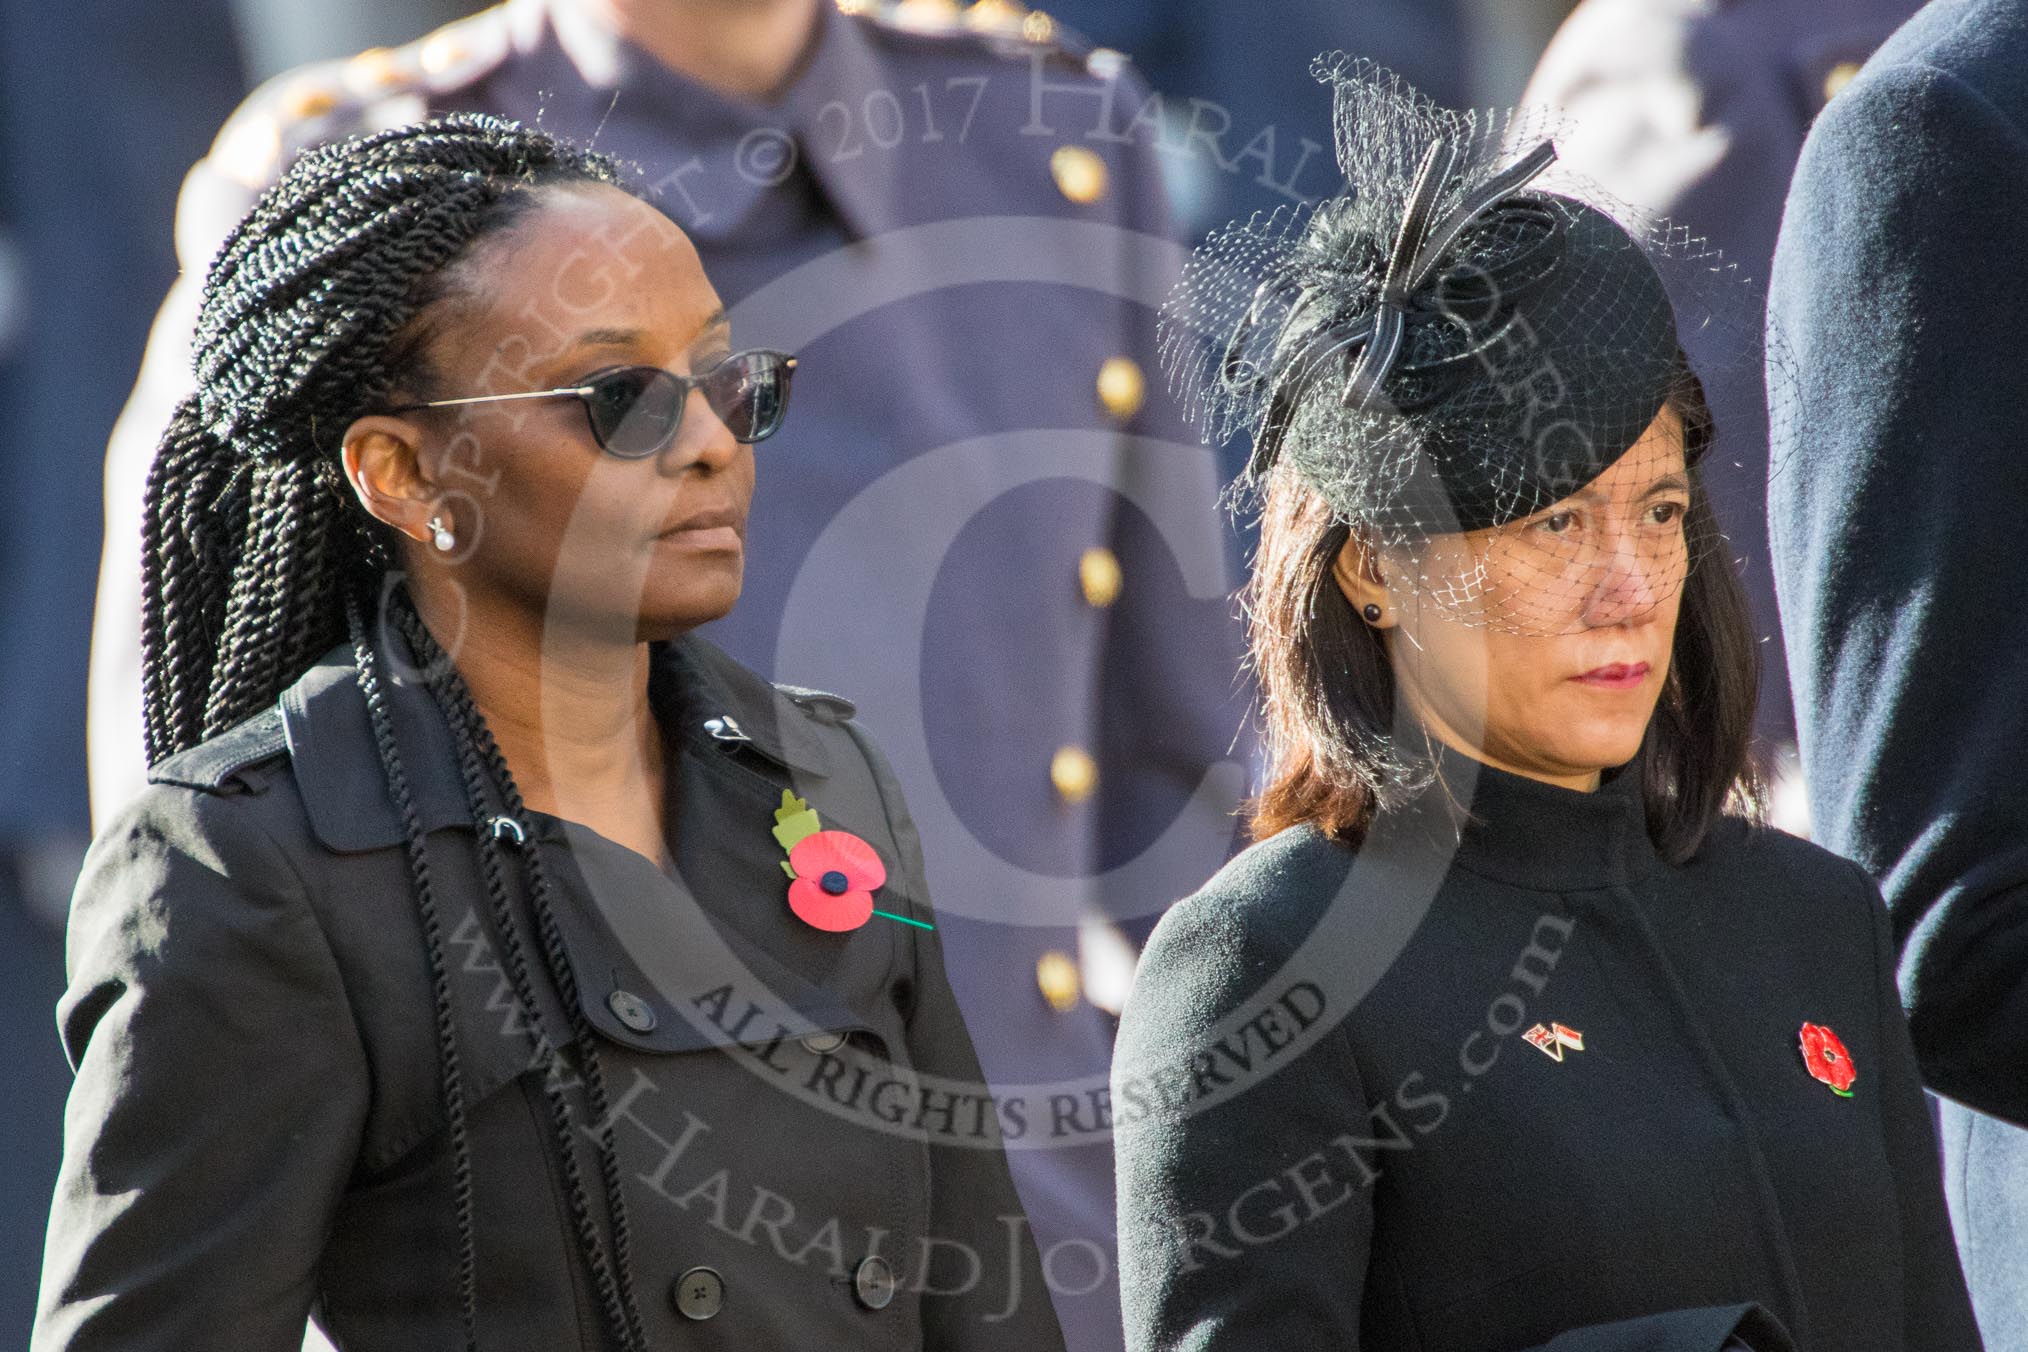 The High Commissioner of Guyana and the The High Commissioner of Singapore, Ms Foo Chi Hsia, during Remembrance Sunday Cenotaph Ceremony 2018 at Horse Guards Parade, Westminster, London, 11 November 2018, 11:03.